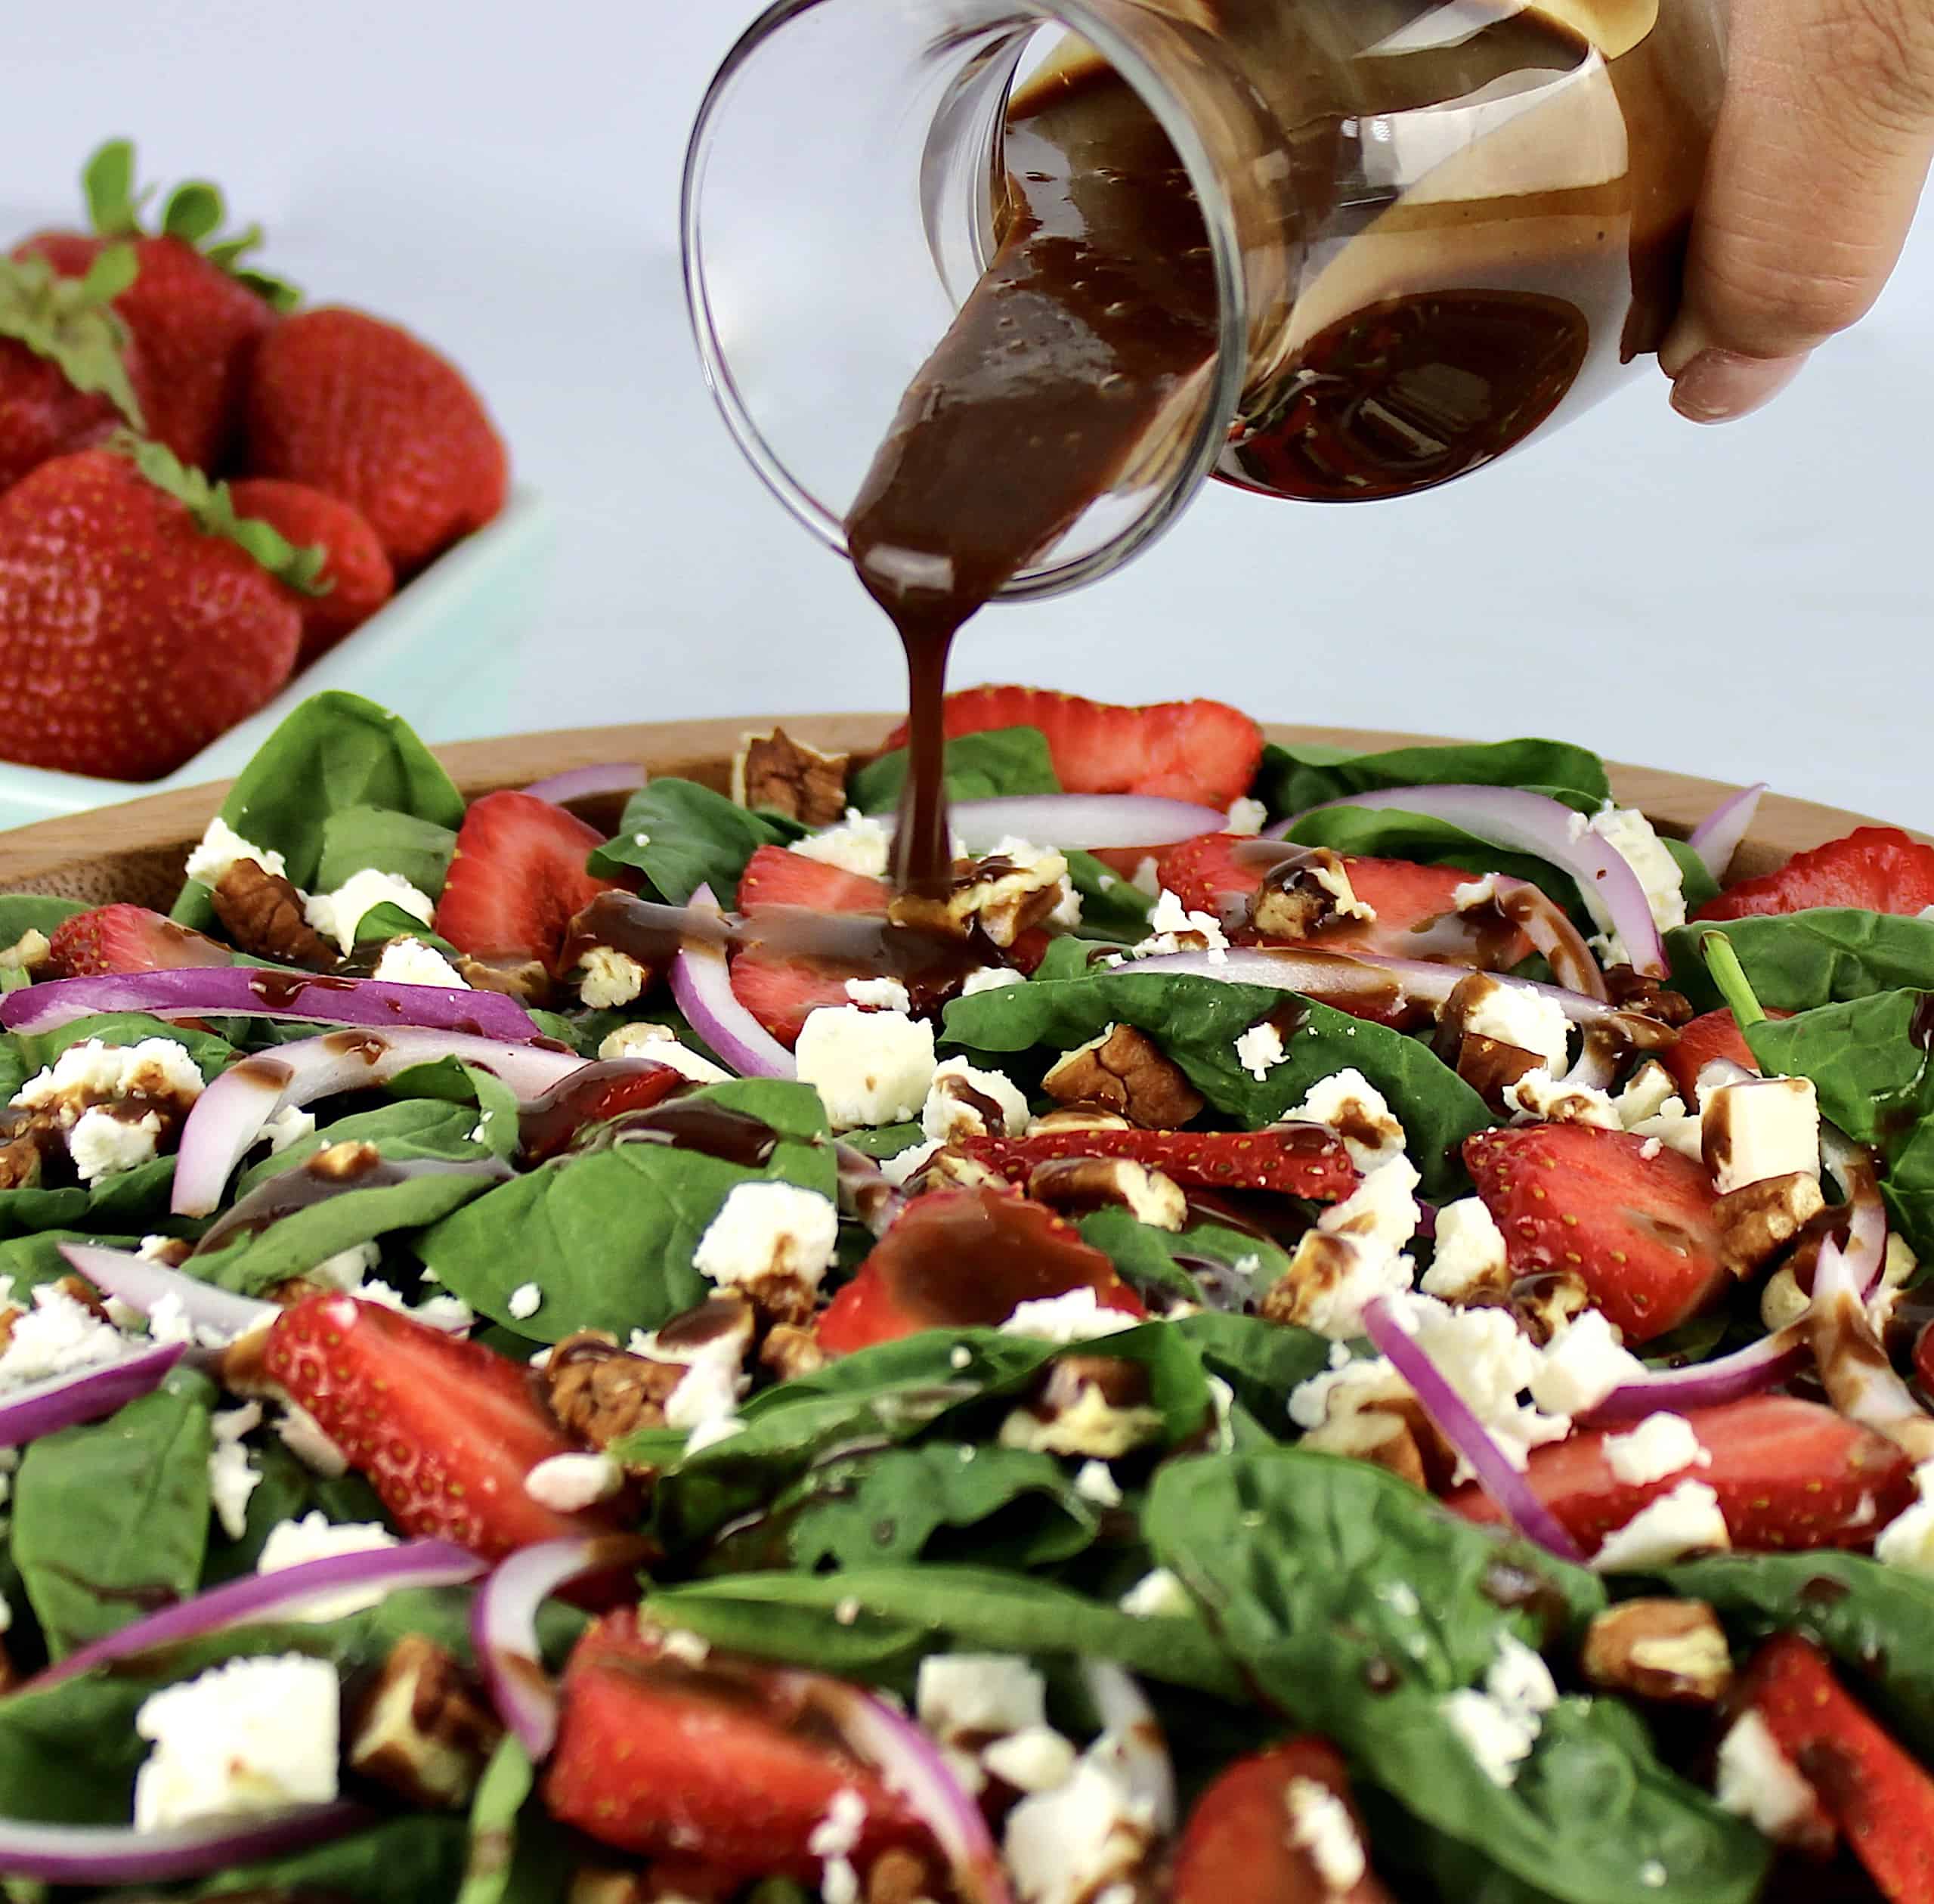 Strawberry Spinach Salad with Balsamic Vinaigrette - Keto Cooking Christian